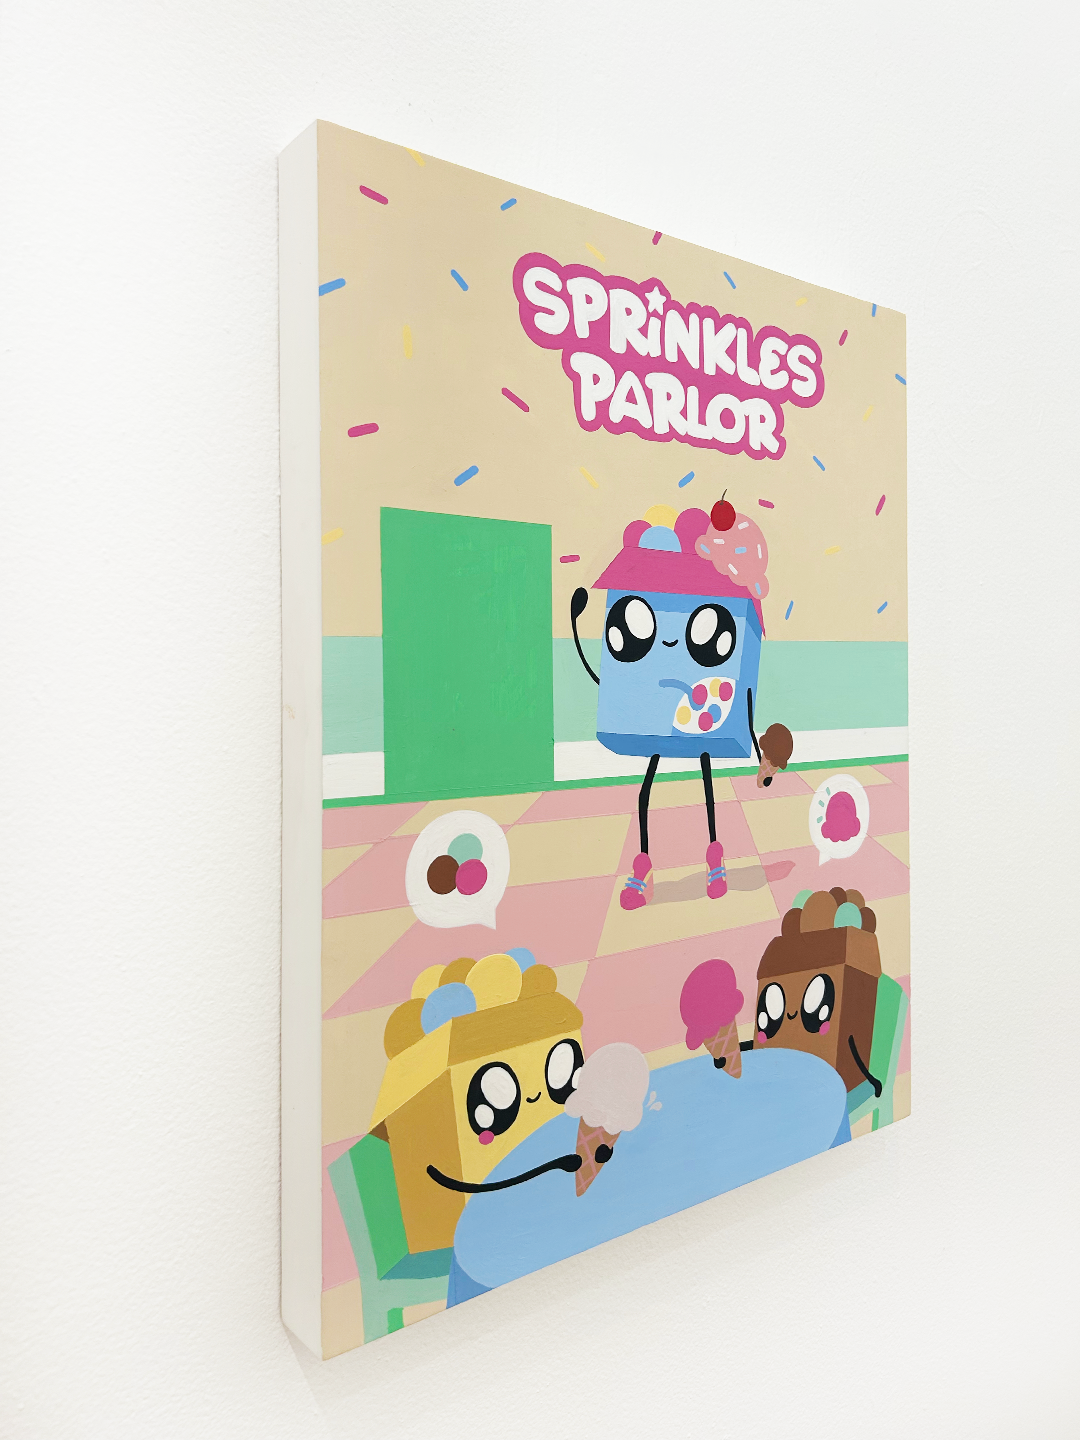 Sprinkles Parlor: The Mobile Game by NEZ